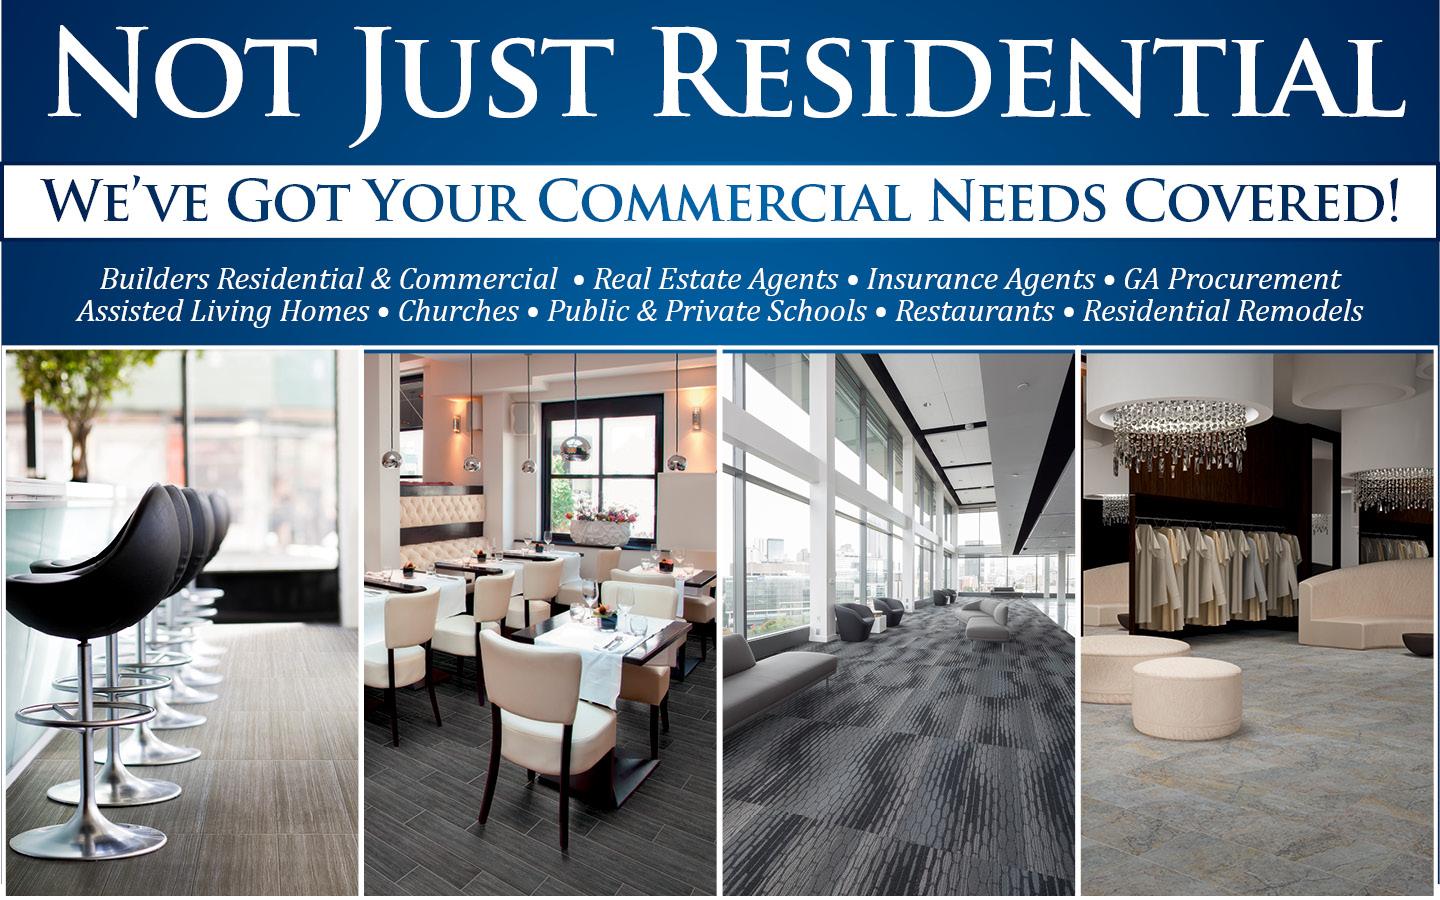 Not Just Residential - We've got your commercial needs covered! - Builders Residential & Commercial | Real Estate Agents | Insurance Agents | GA Procurement | Assisted Living Homes | Churches | Public & Private Schools | Restaurants | Residential Remodels